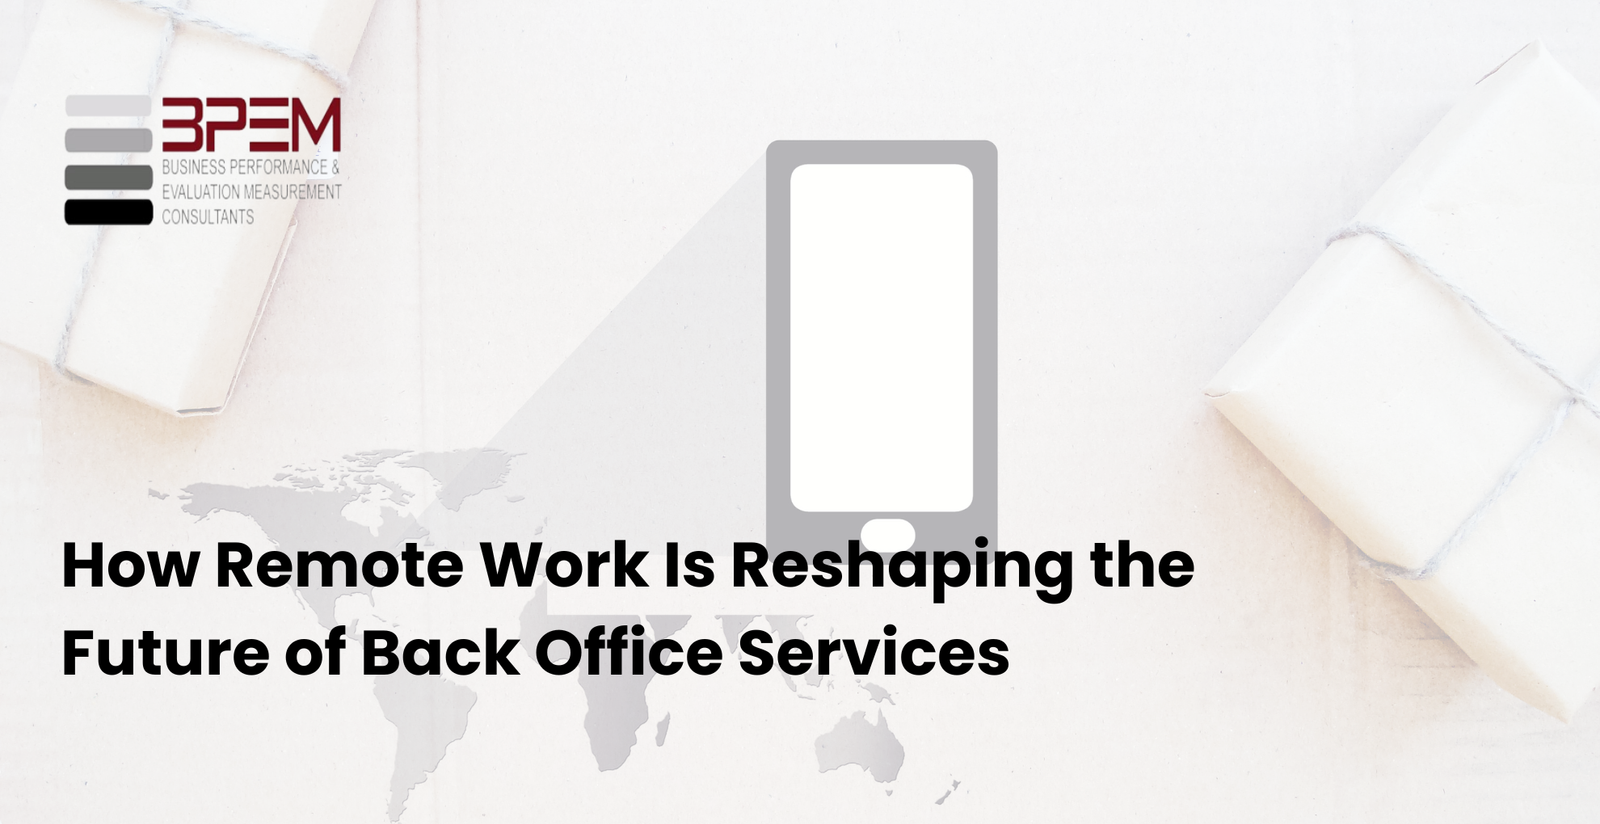 How Remote Work Is Reshaping the Future of Back Office Services